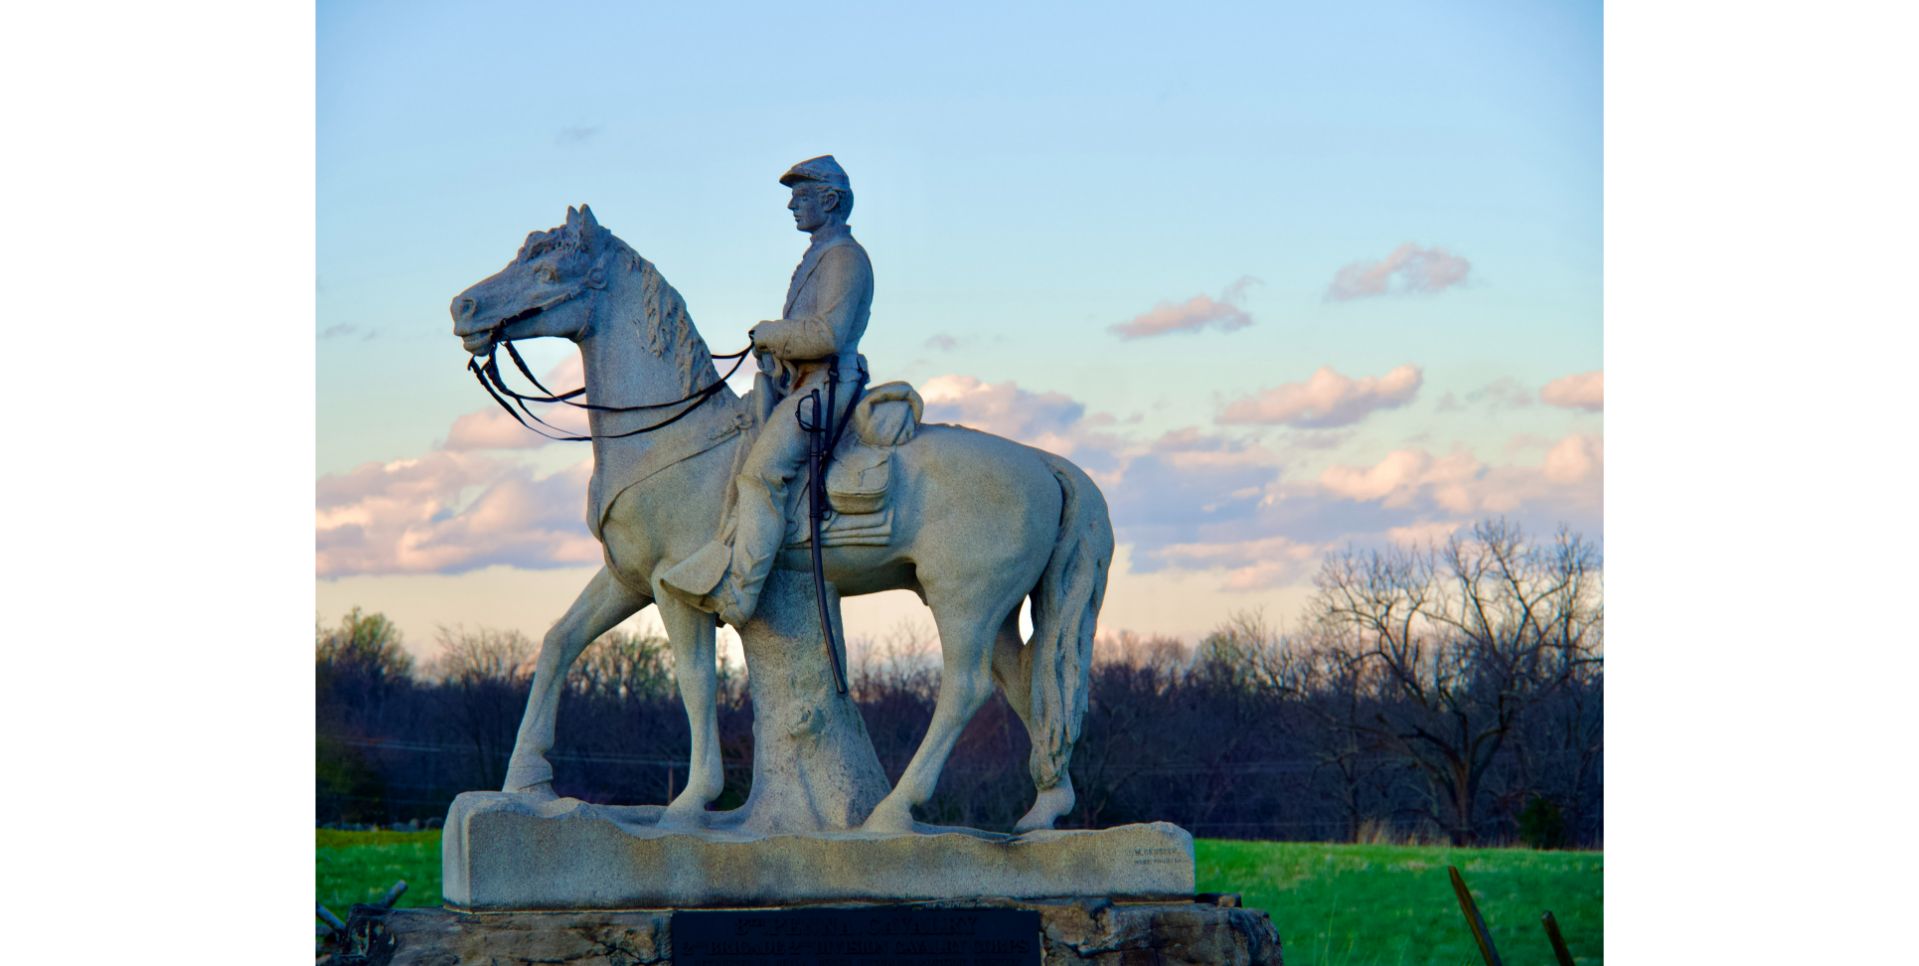 Statue of man on horse.